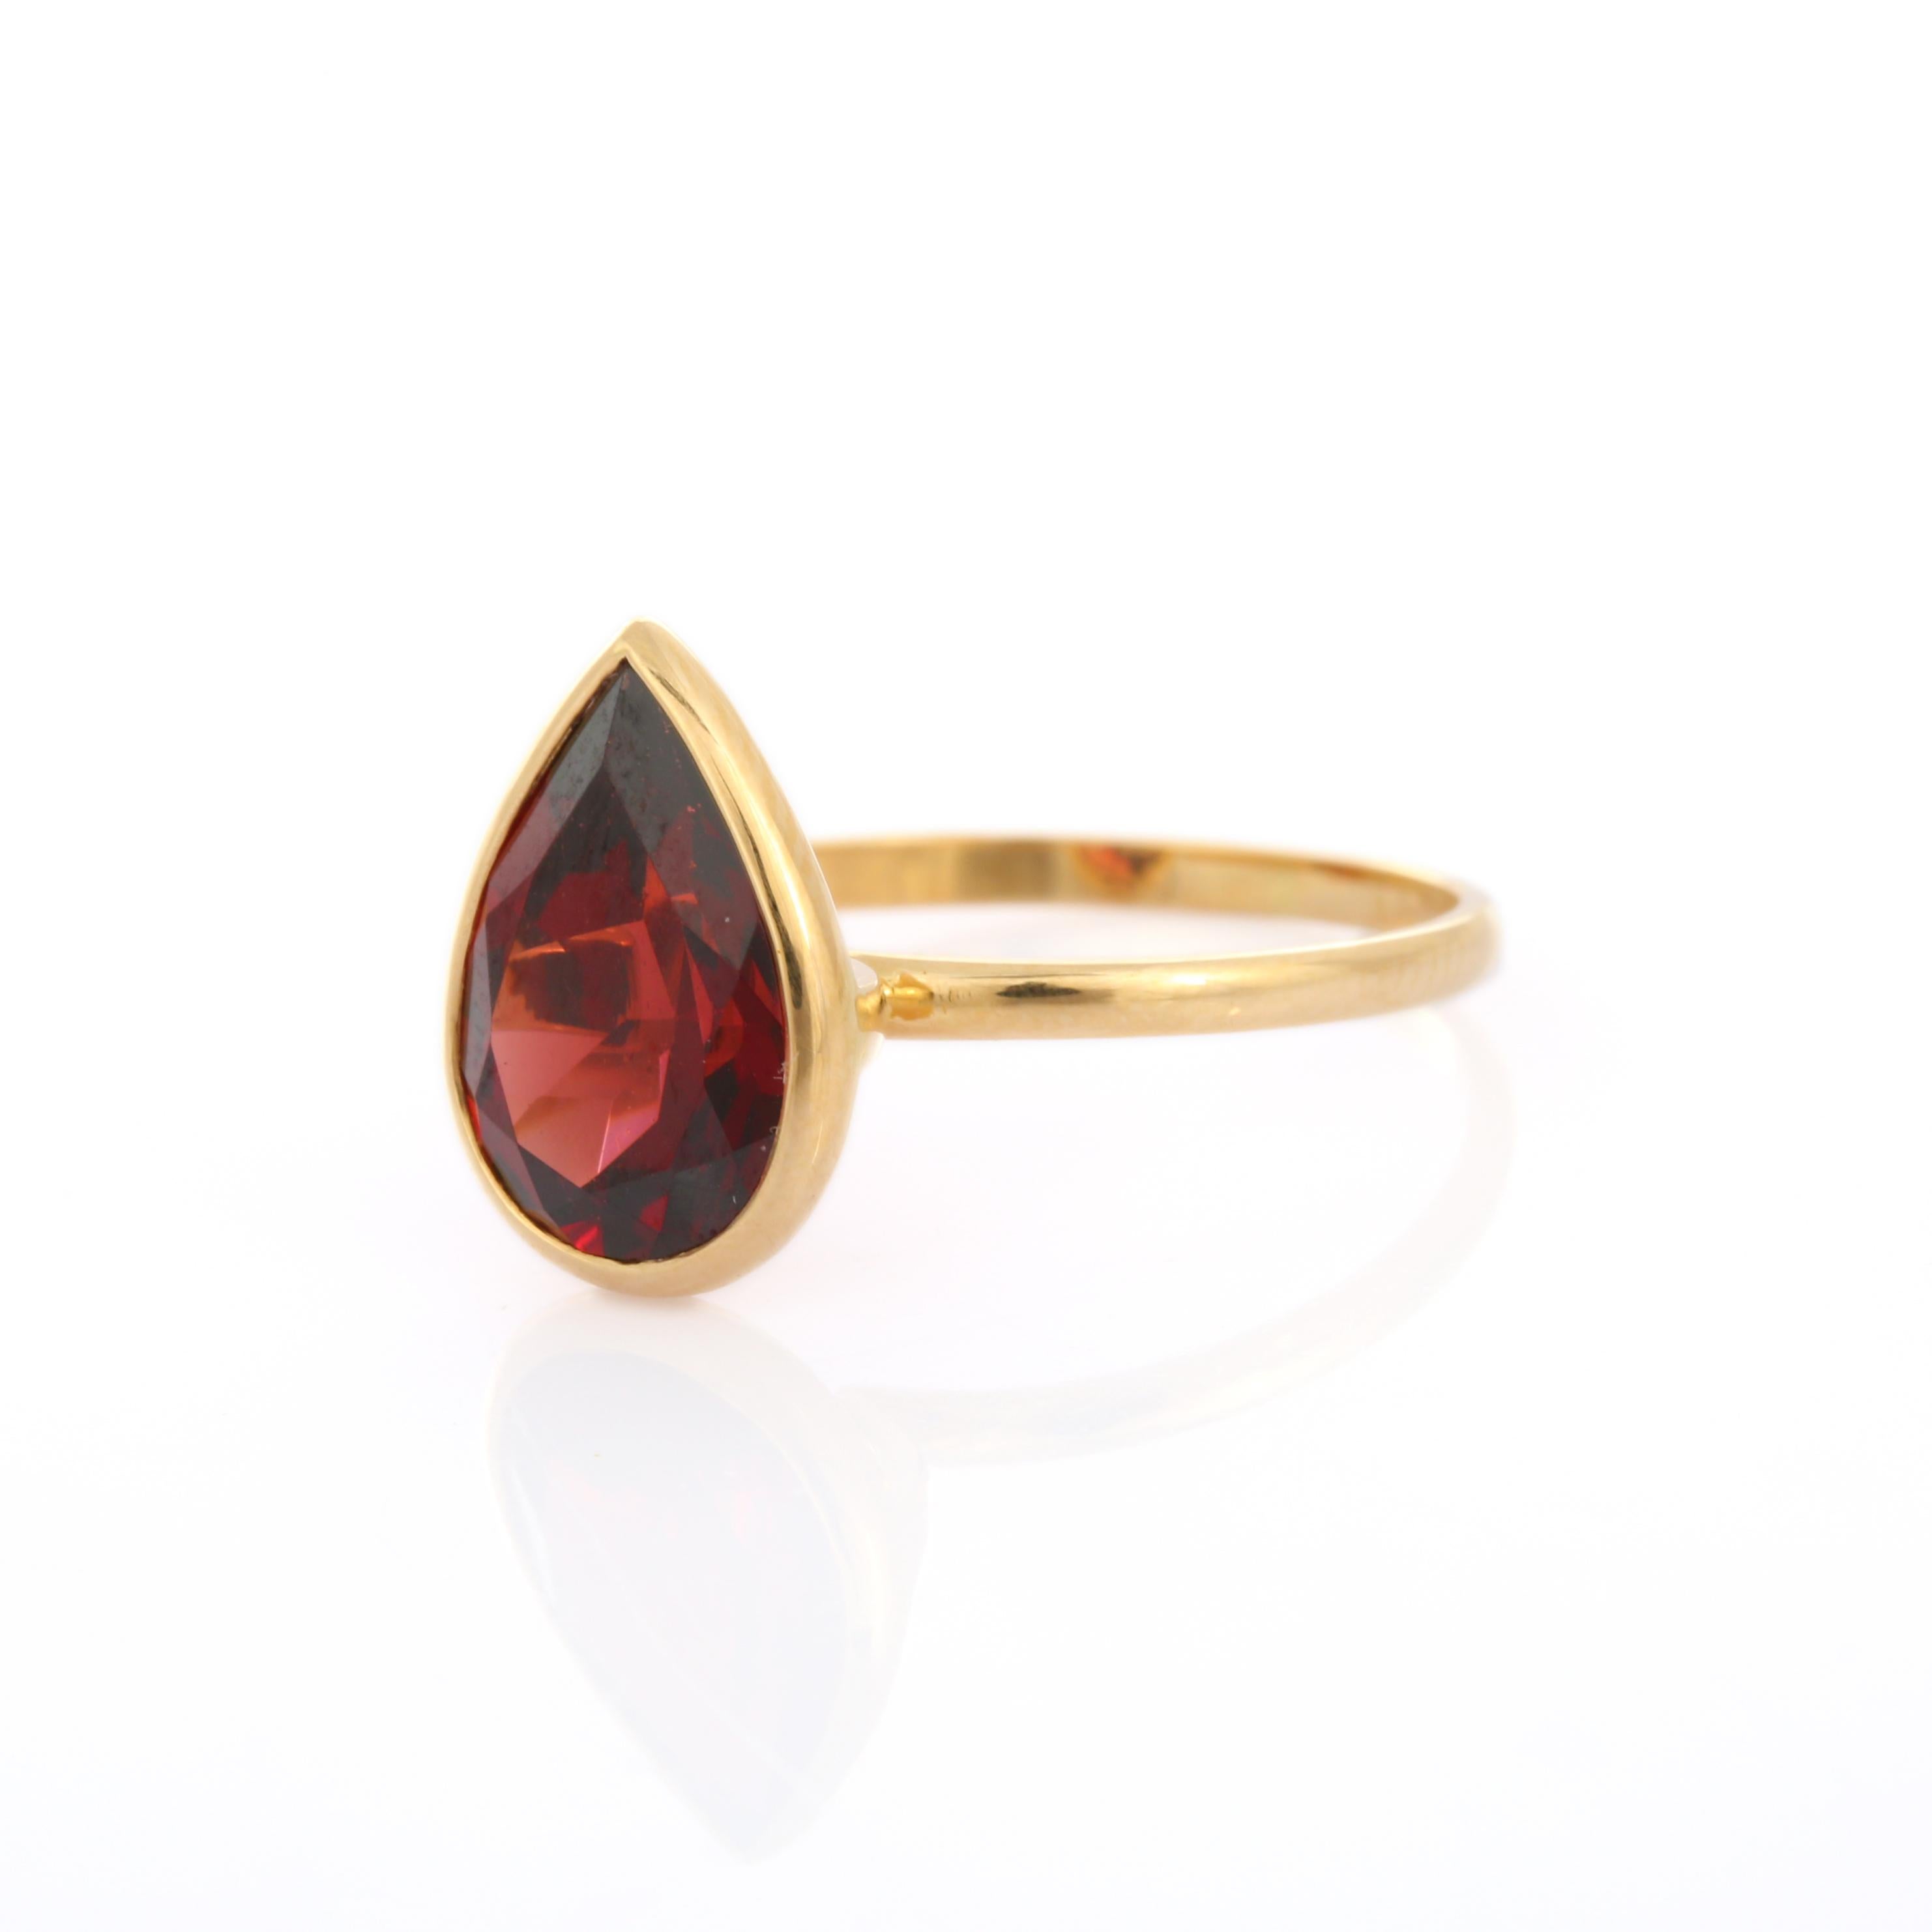 For Sale:  3.5 Carat Pear Cut Garnet Cocktail Ring in 18K Yellow Gold 2